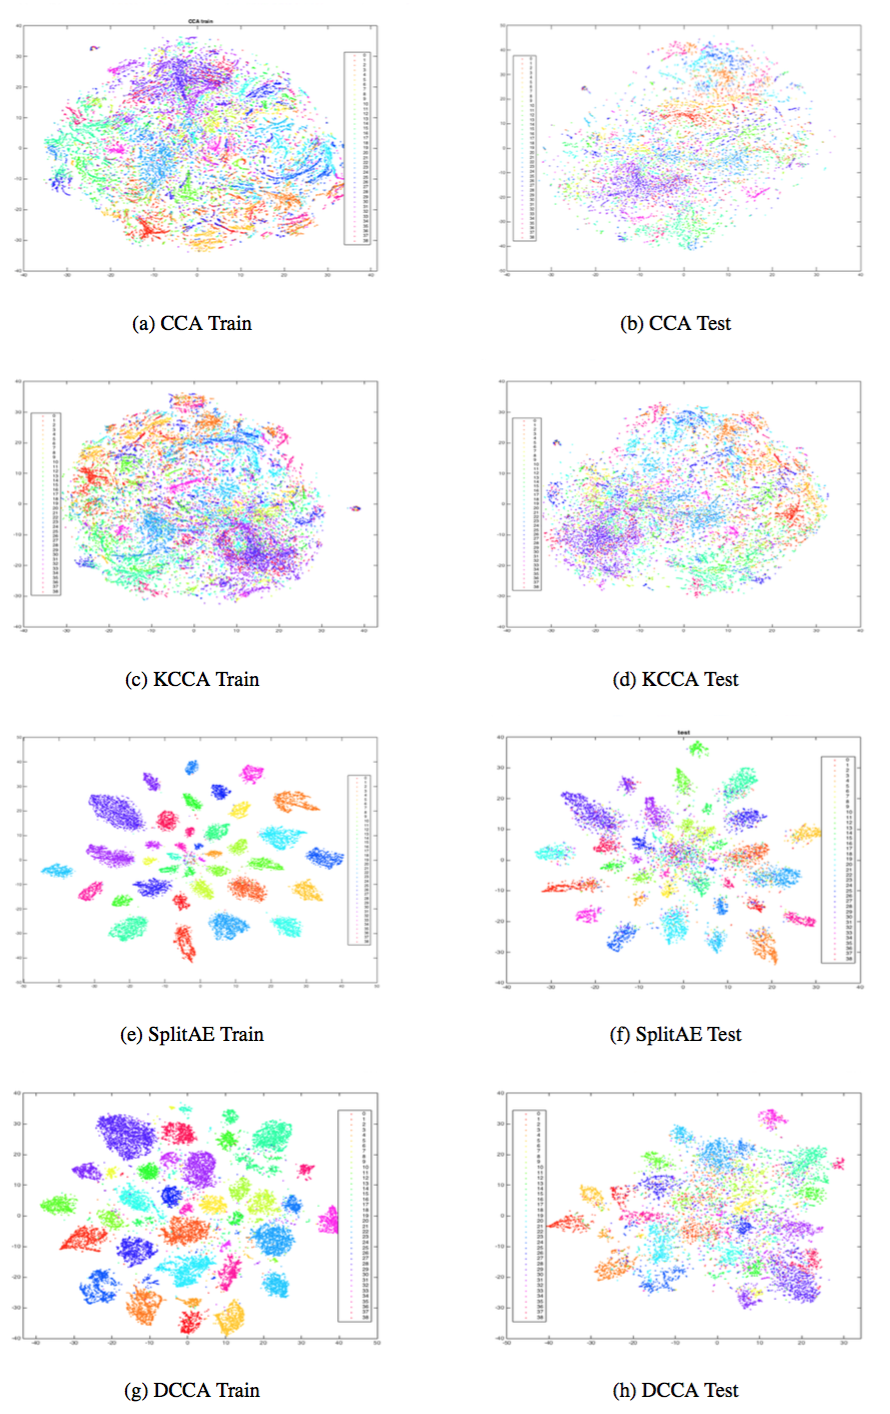 t-SNE visualization of learned phone embeddings